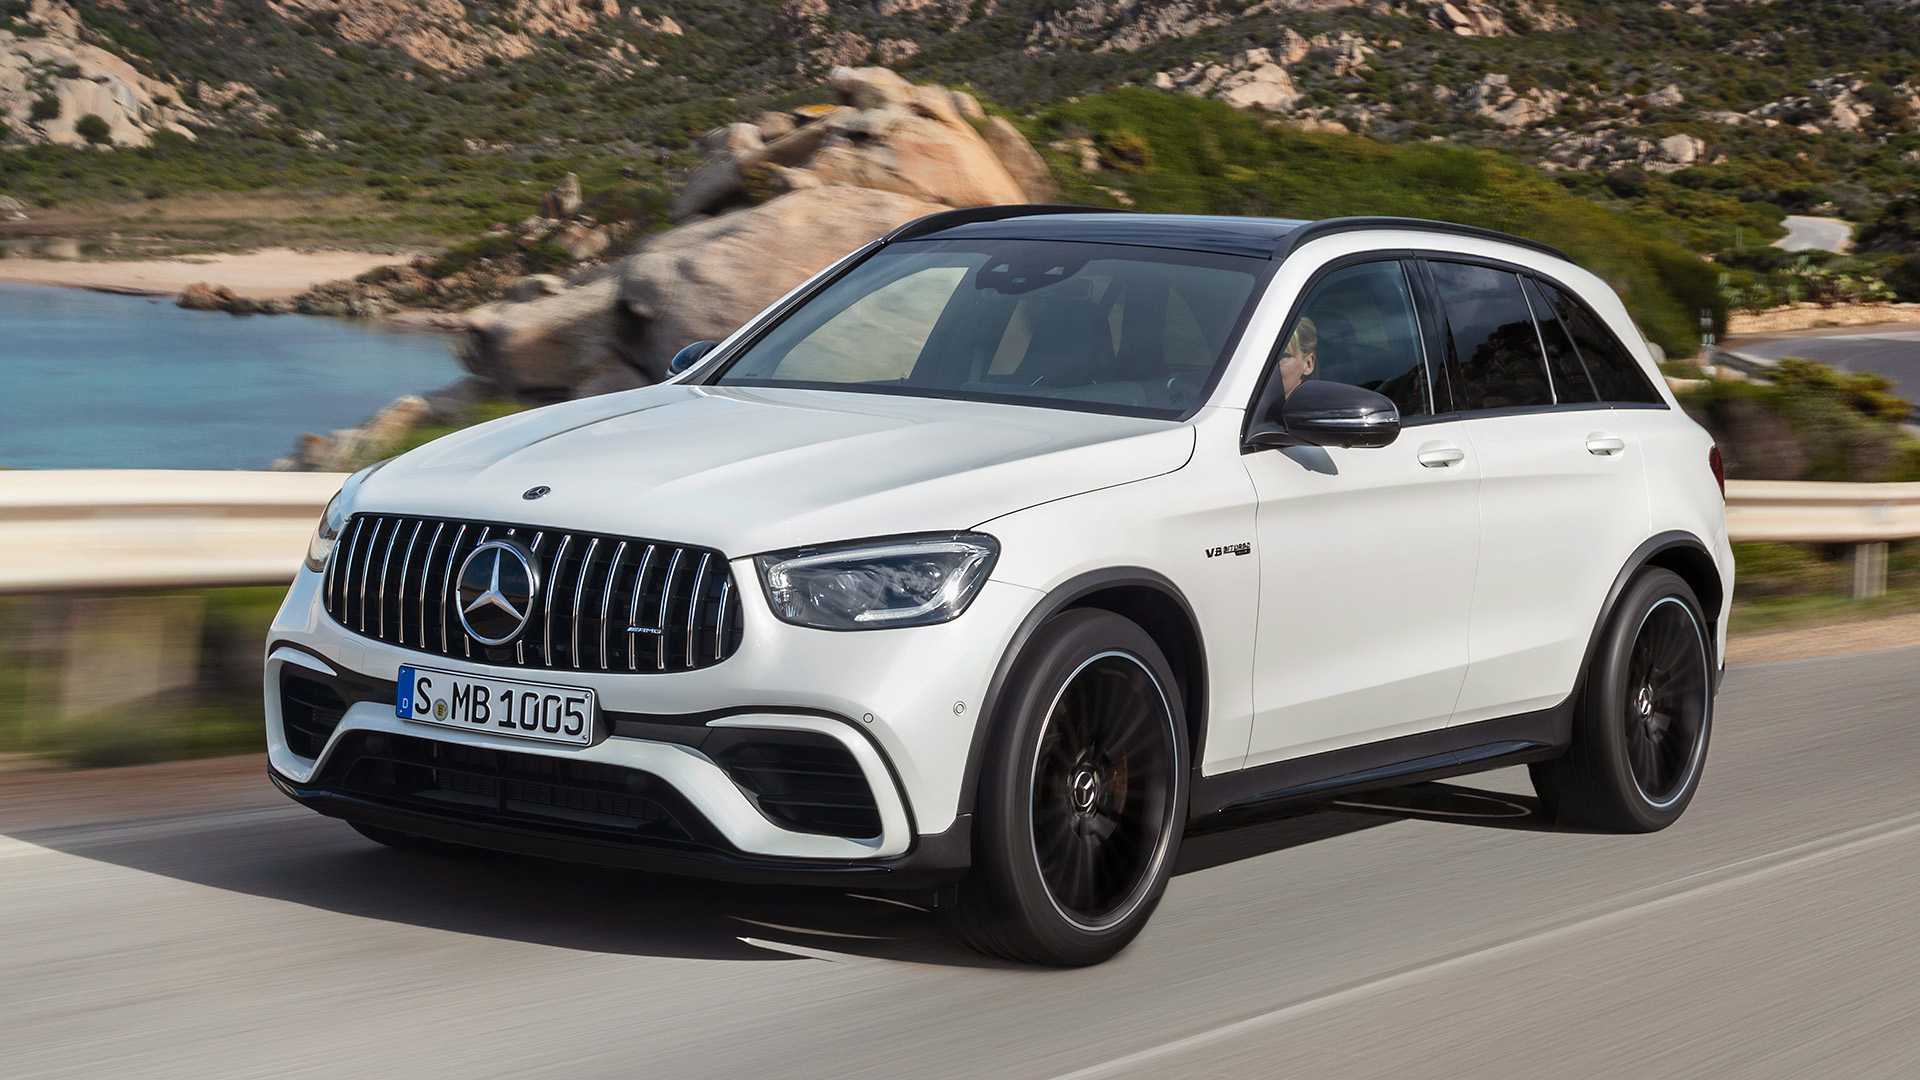 This is 2019 Mercedes-AMG GLC 63: The fastest SUV in the world